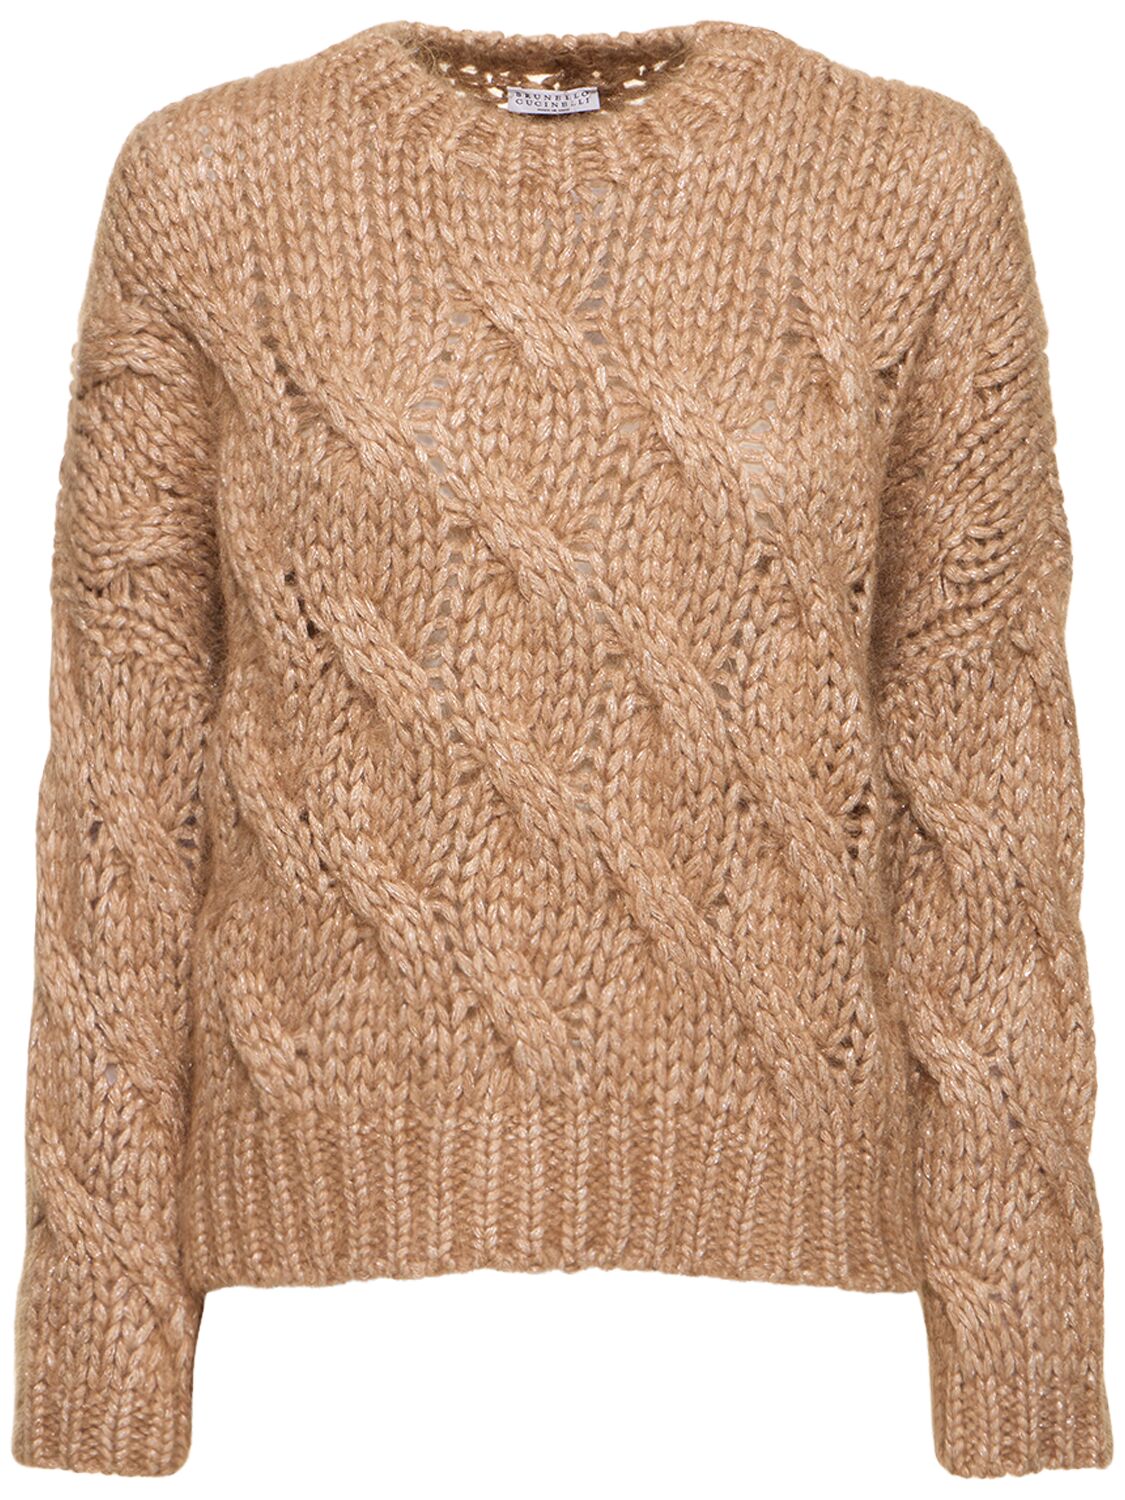 Brunello Cucinelli Mohair Blend Braided Knit Sweater In Camel